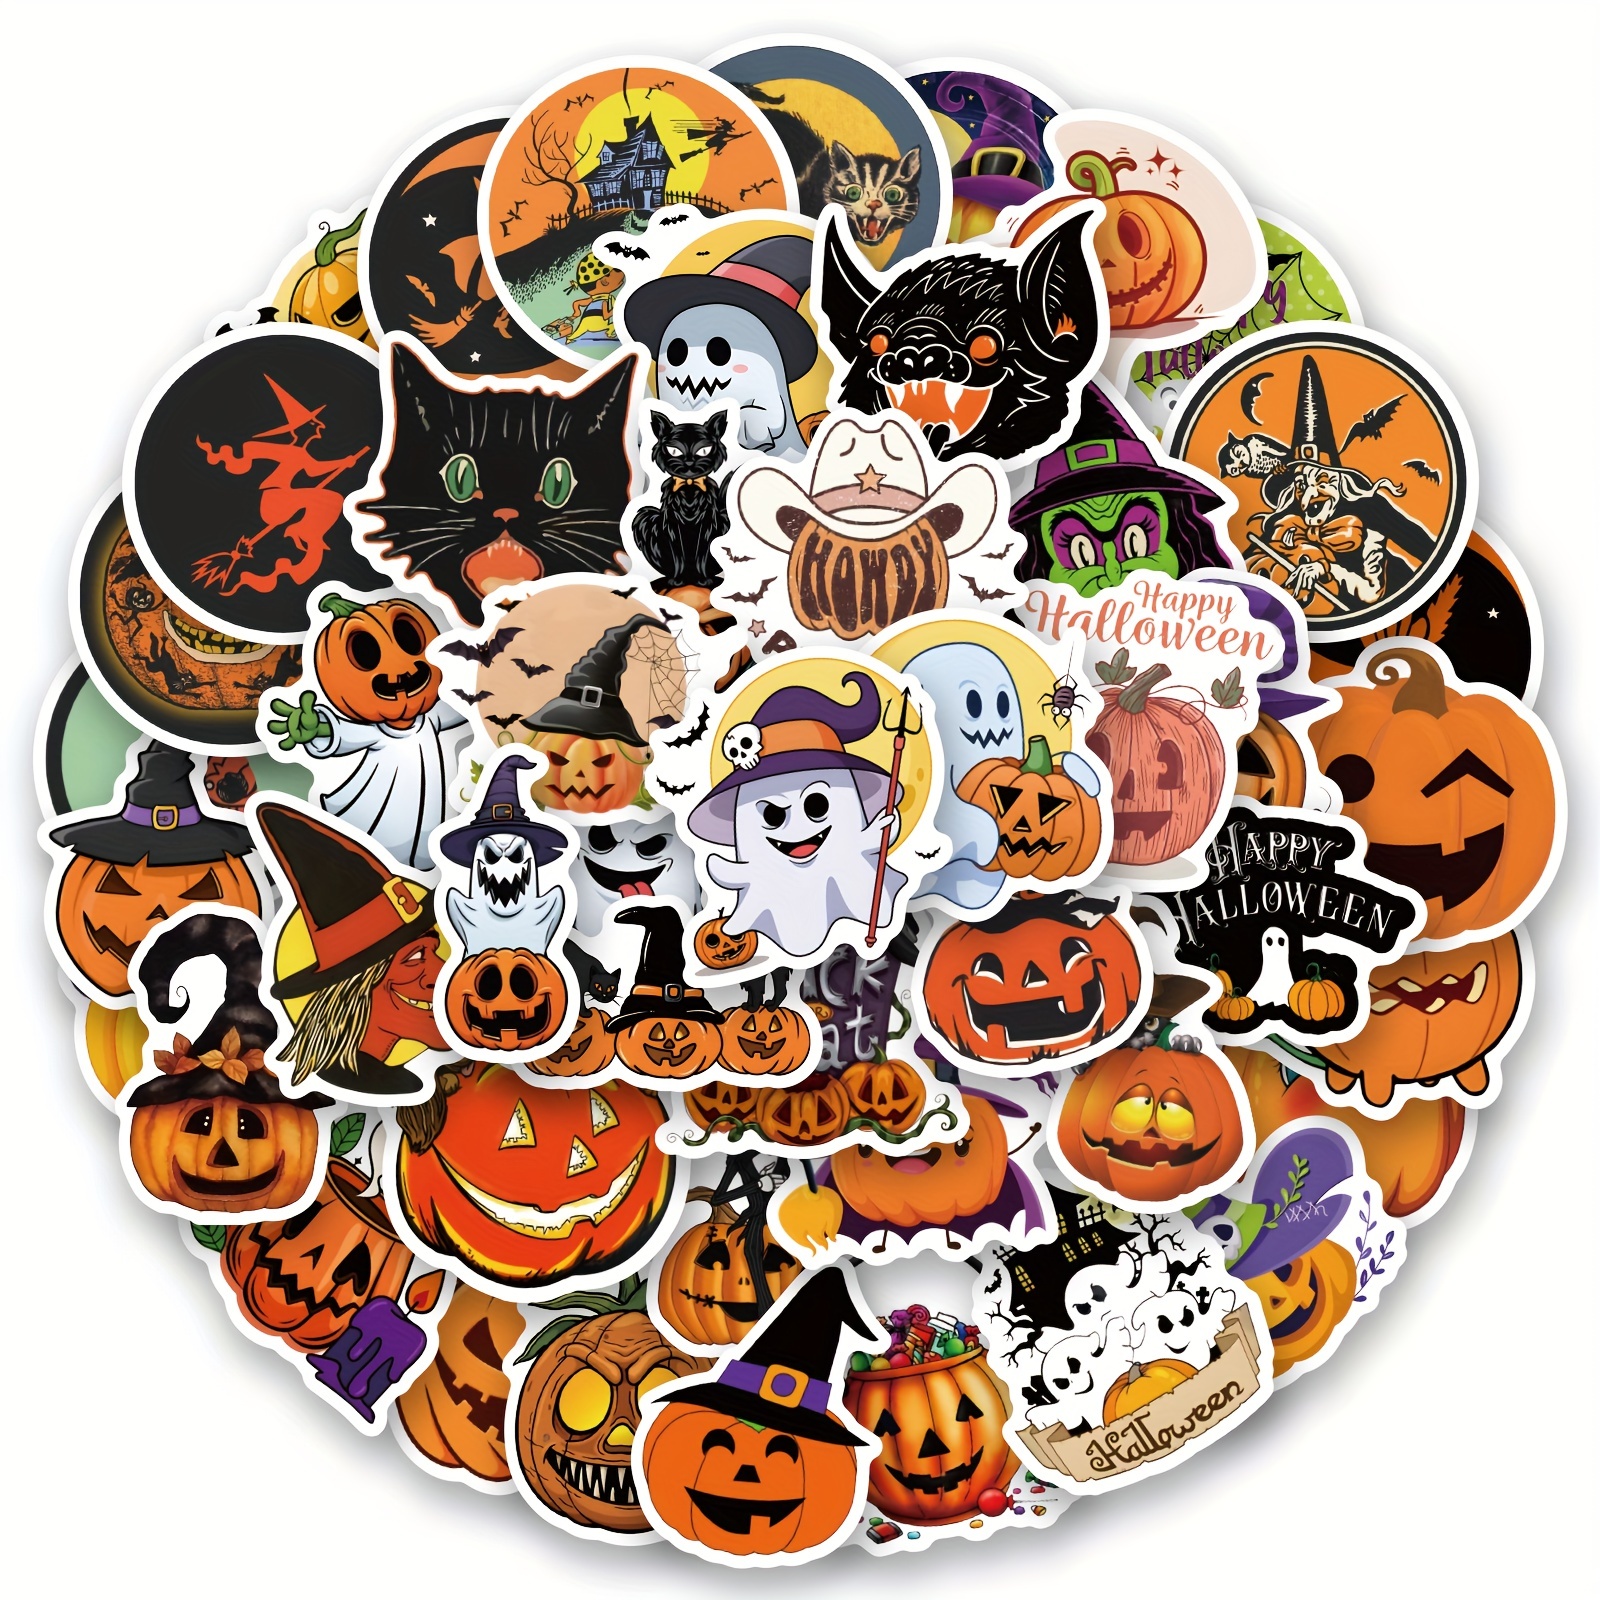 50 LOOSE PACKS (300 Stickers) - Five Nights At Freddy's stickers